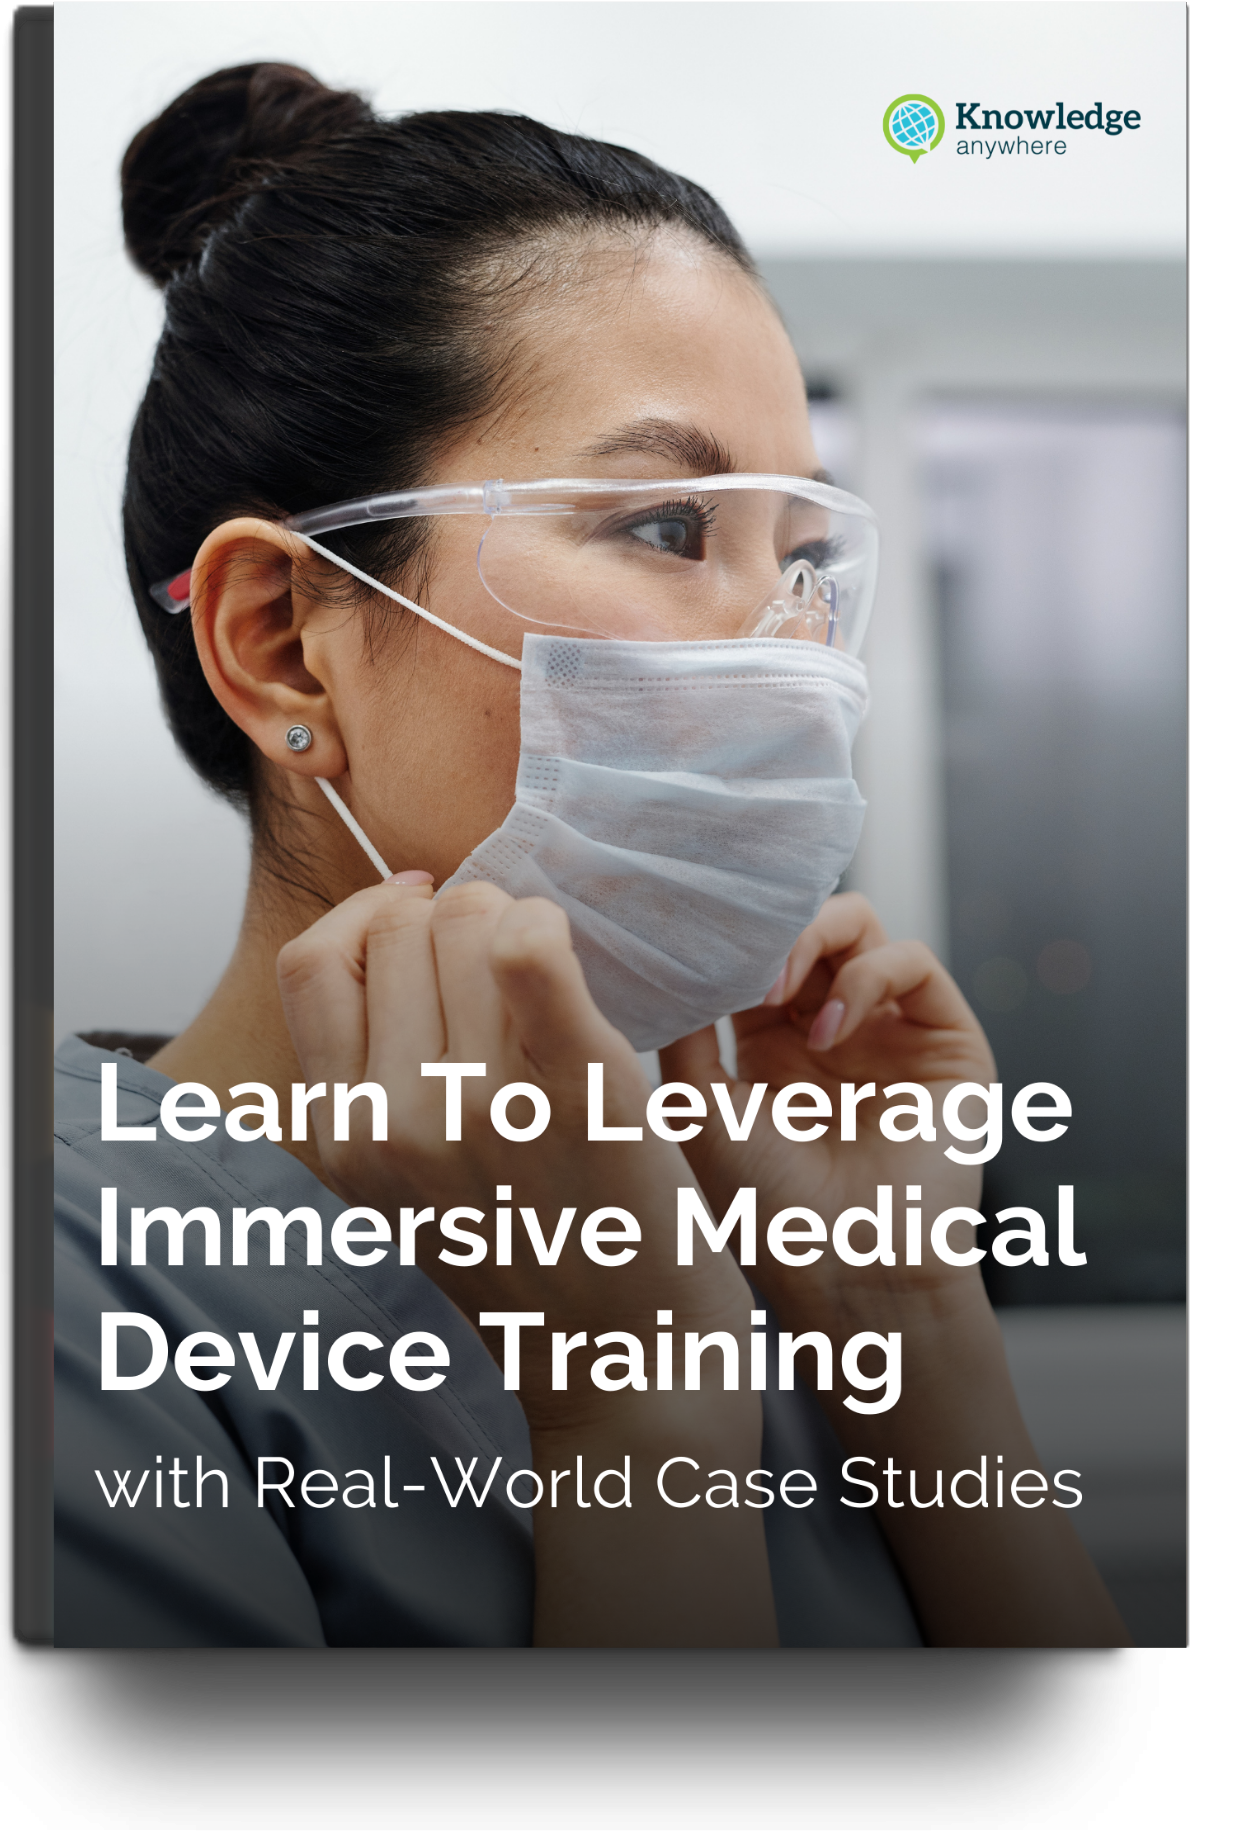 Learn To Leverage Immersive Medical Device Training